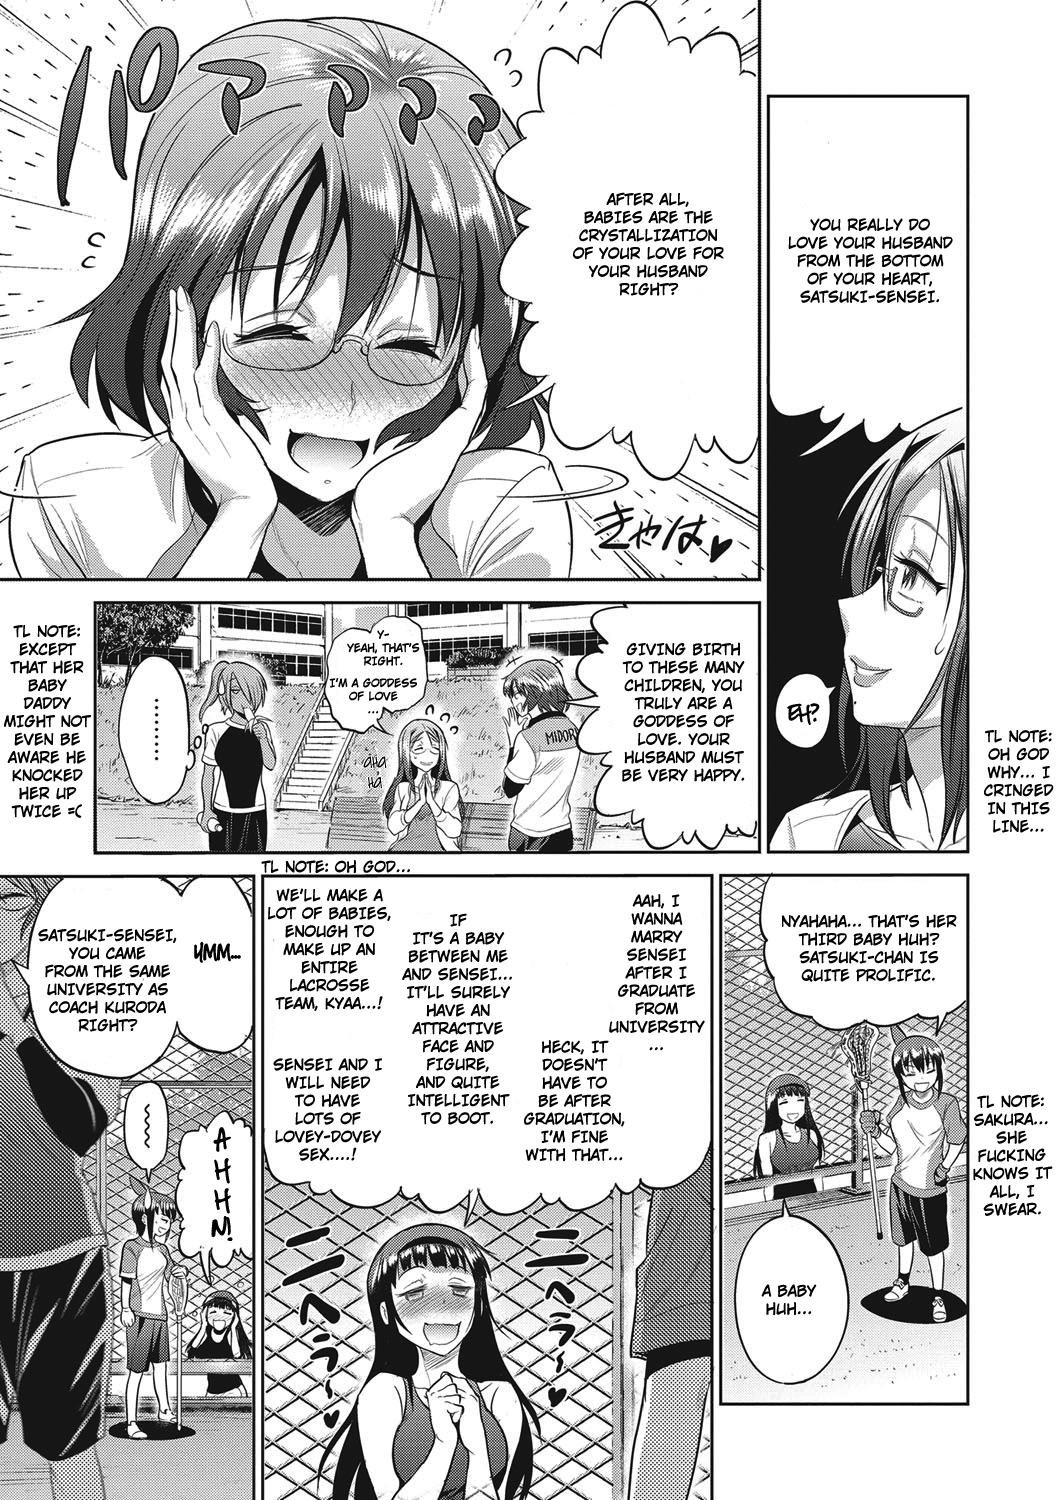 Peituda [DISTANCE] Joshi Lacu! - Girls Lacrosse Club ~2 Years Later~ Ch. 3 (COMIC ExE 04) [English] [TripleSevenScans] [Digital] Perfect - Page 7